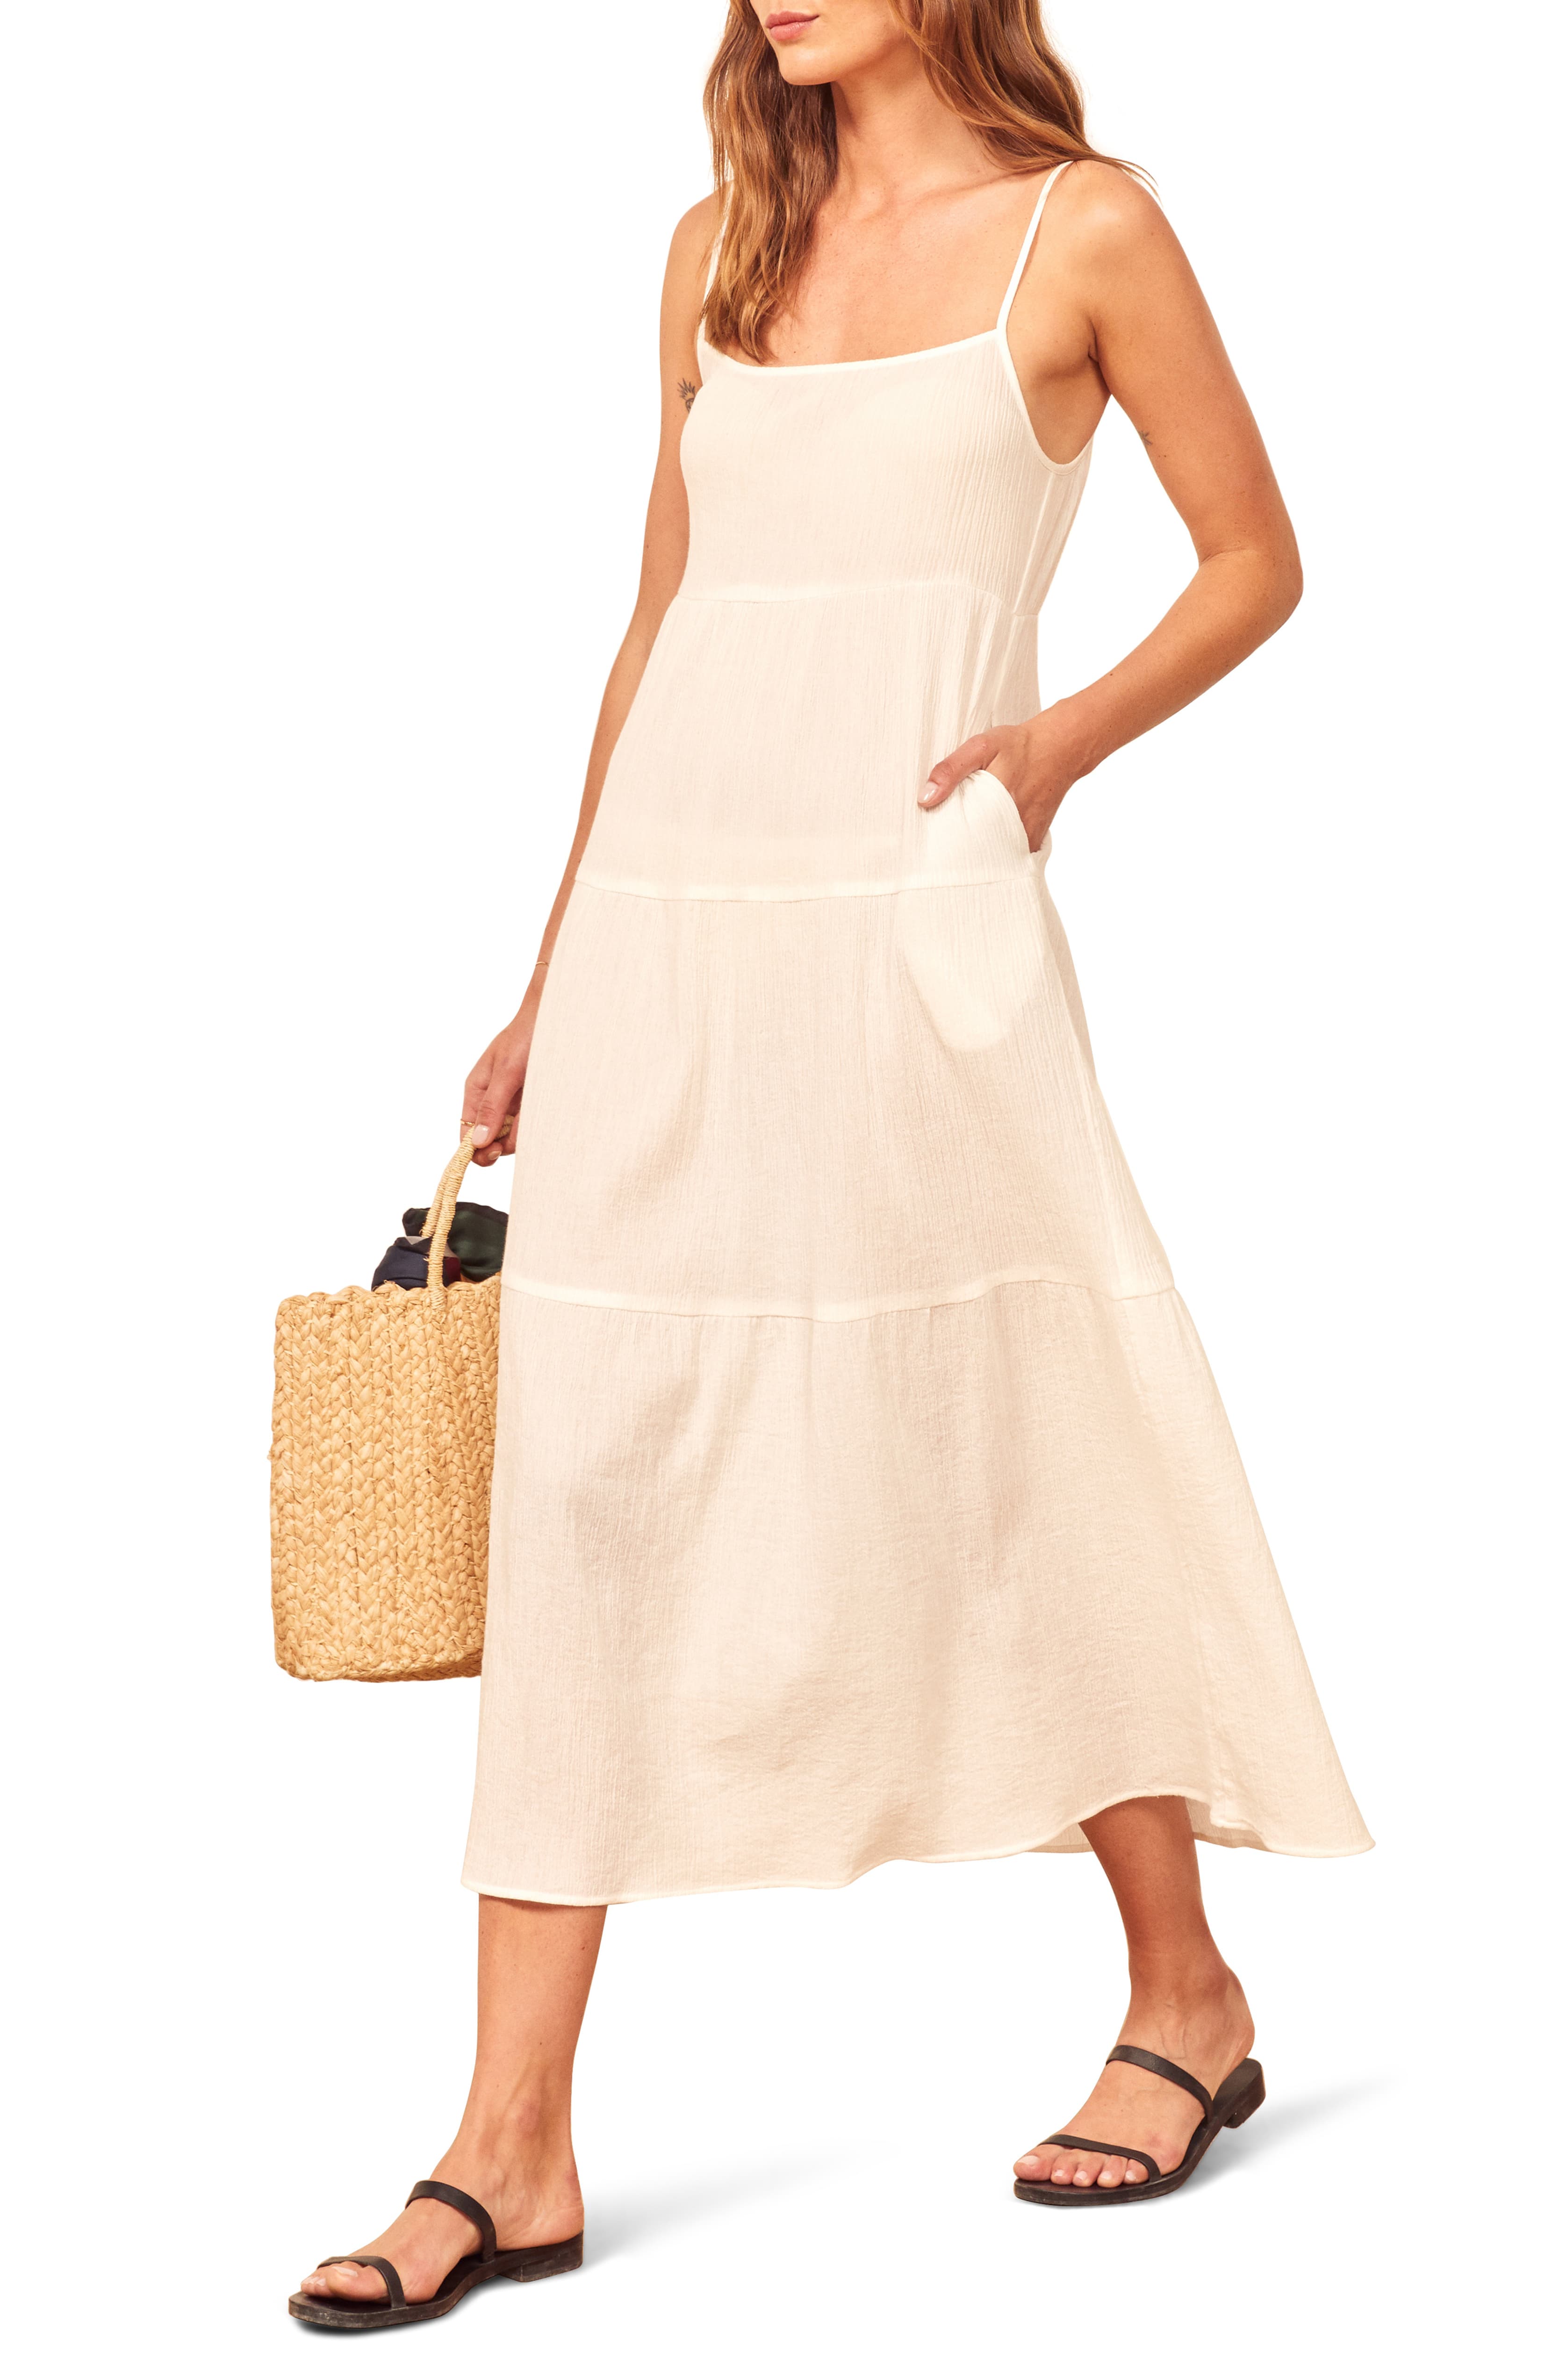 These Airy Dresses Will Keep You Cute & Sweat-Free Through The Blazing Summer Heat